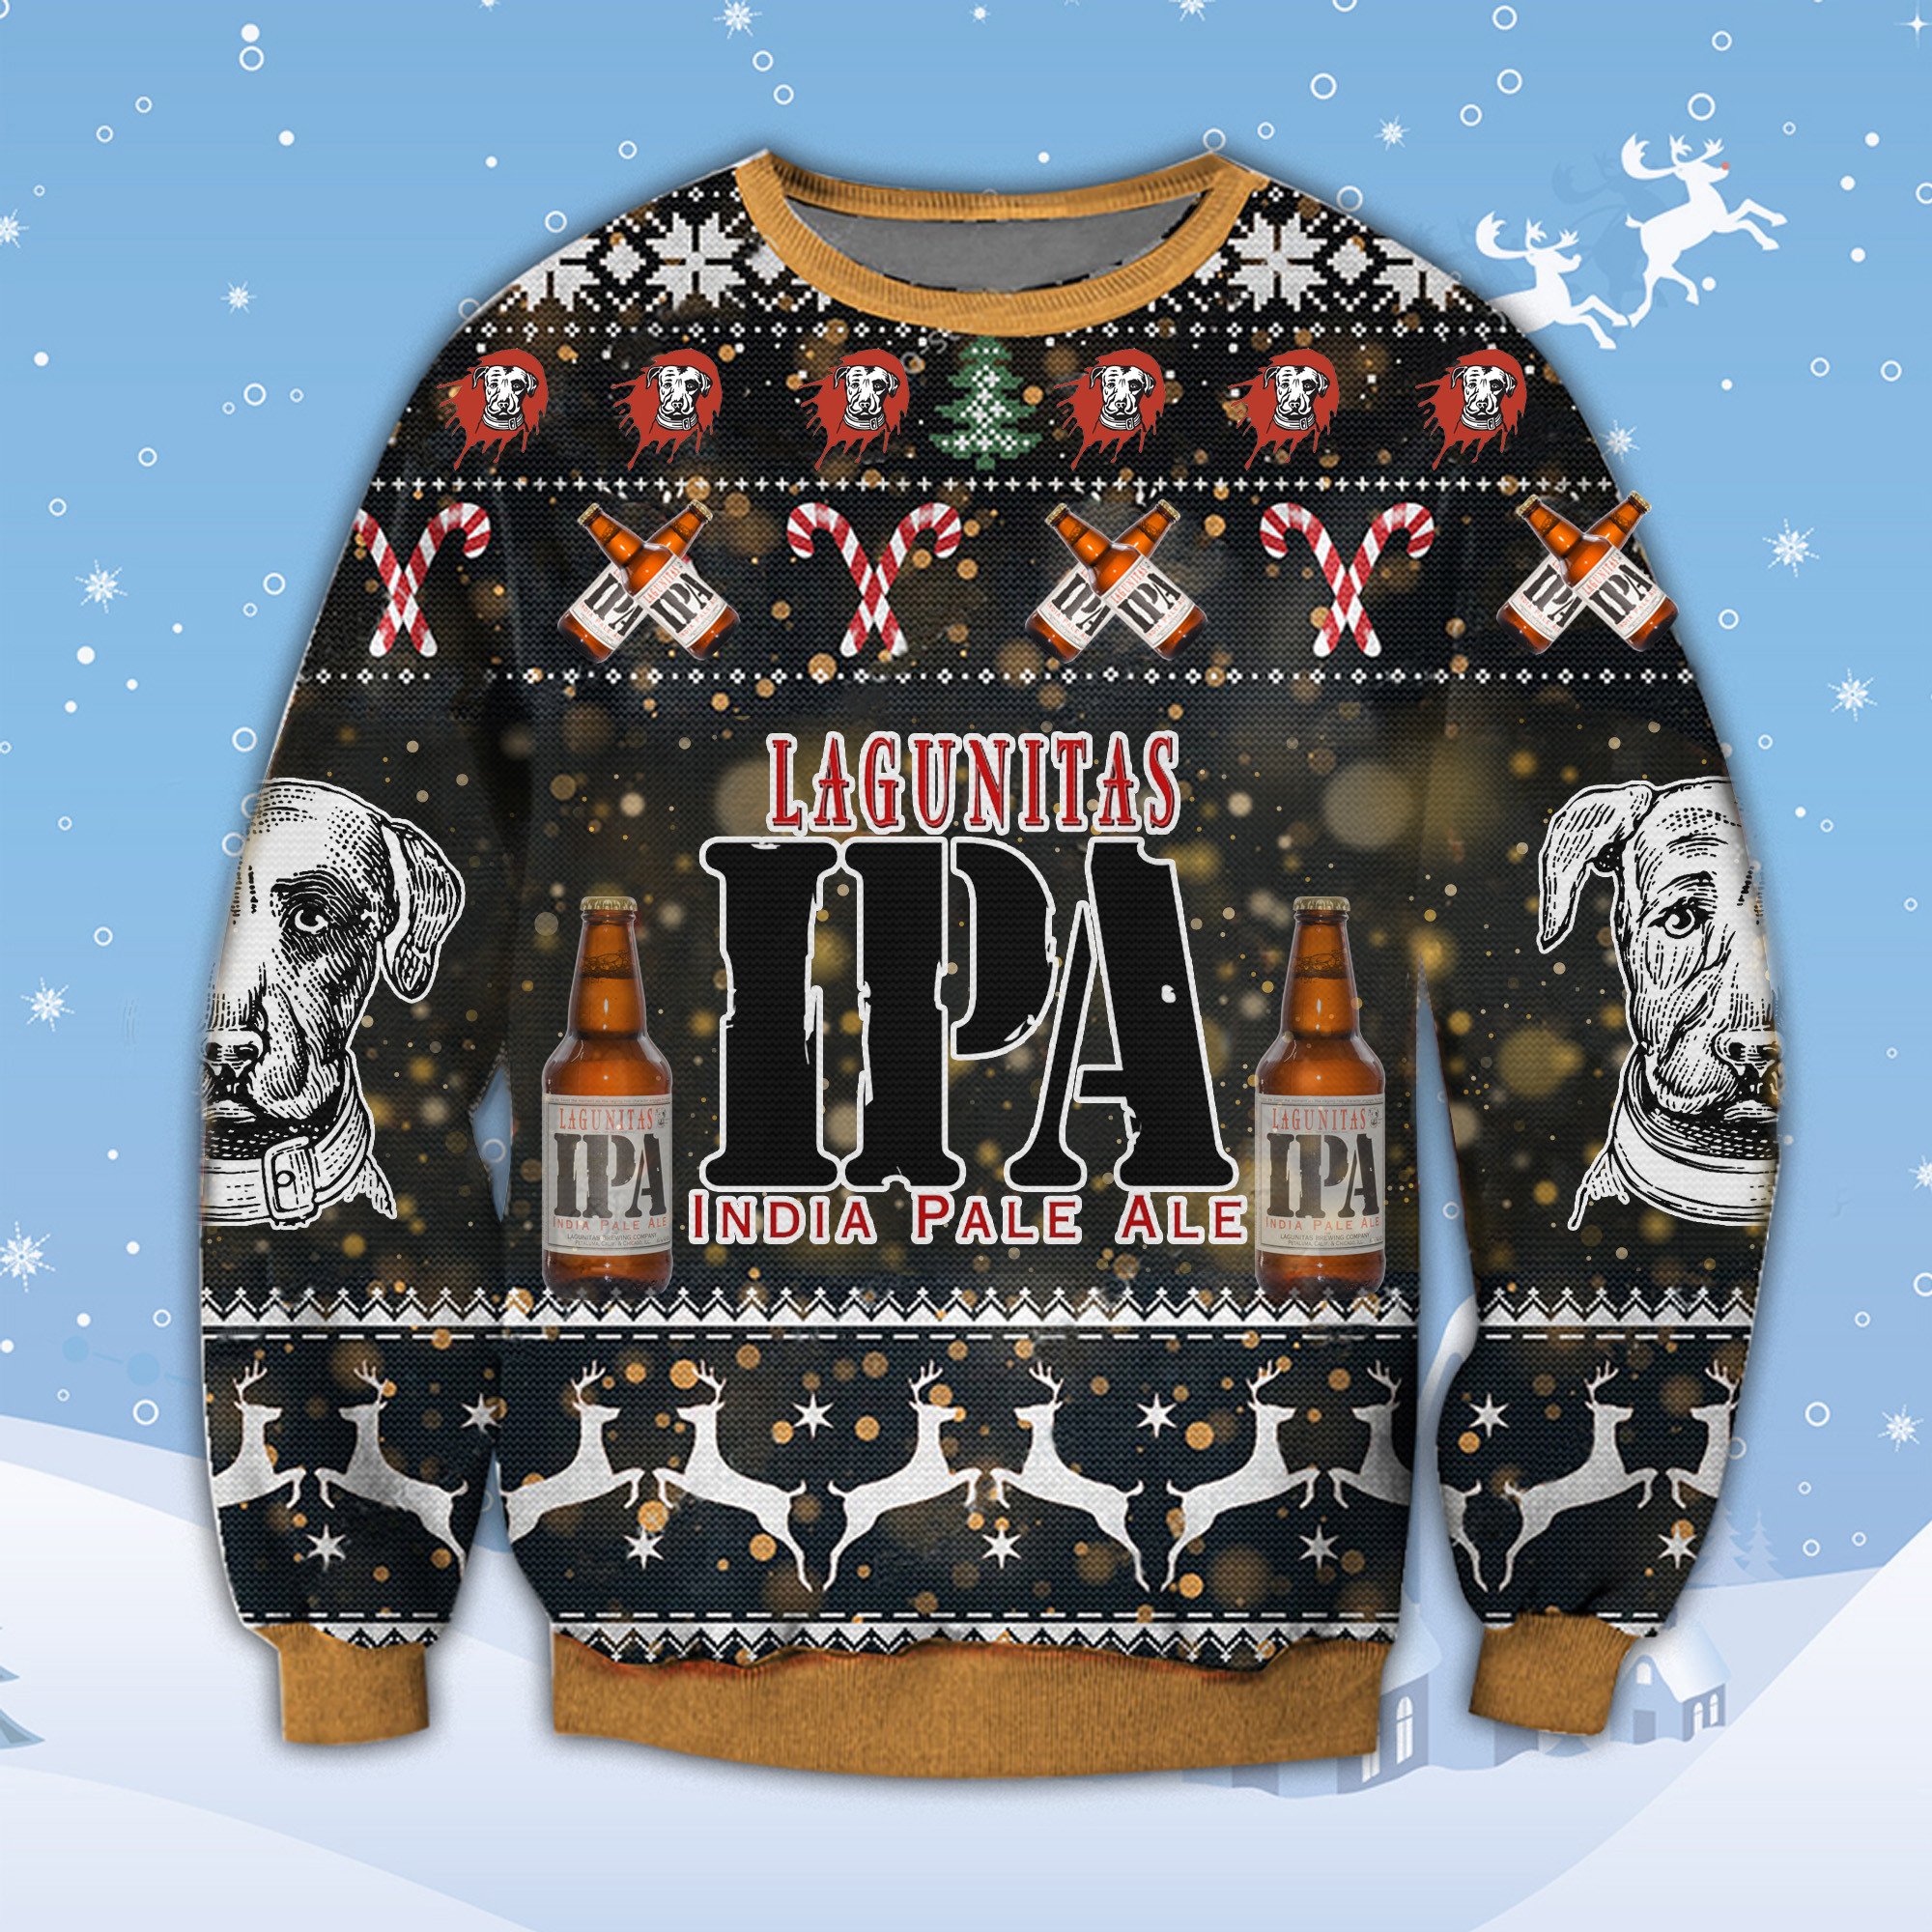 NEW Lagunitas India Pale Ale ugly Christmas sweater 6